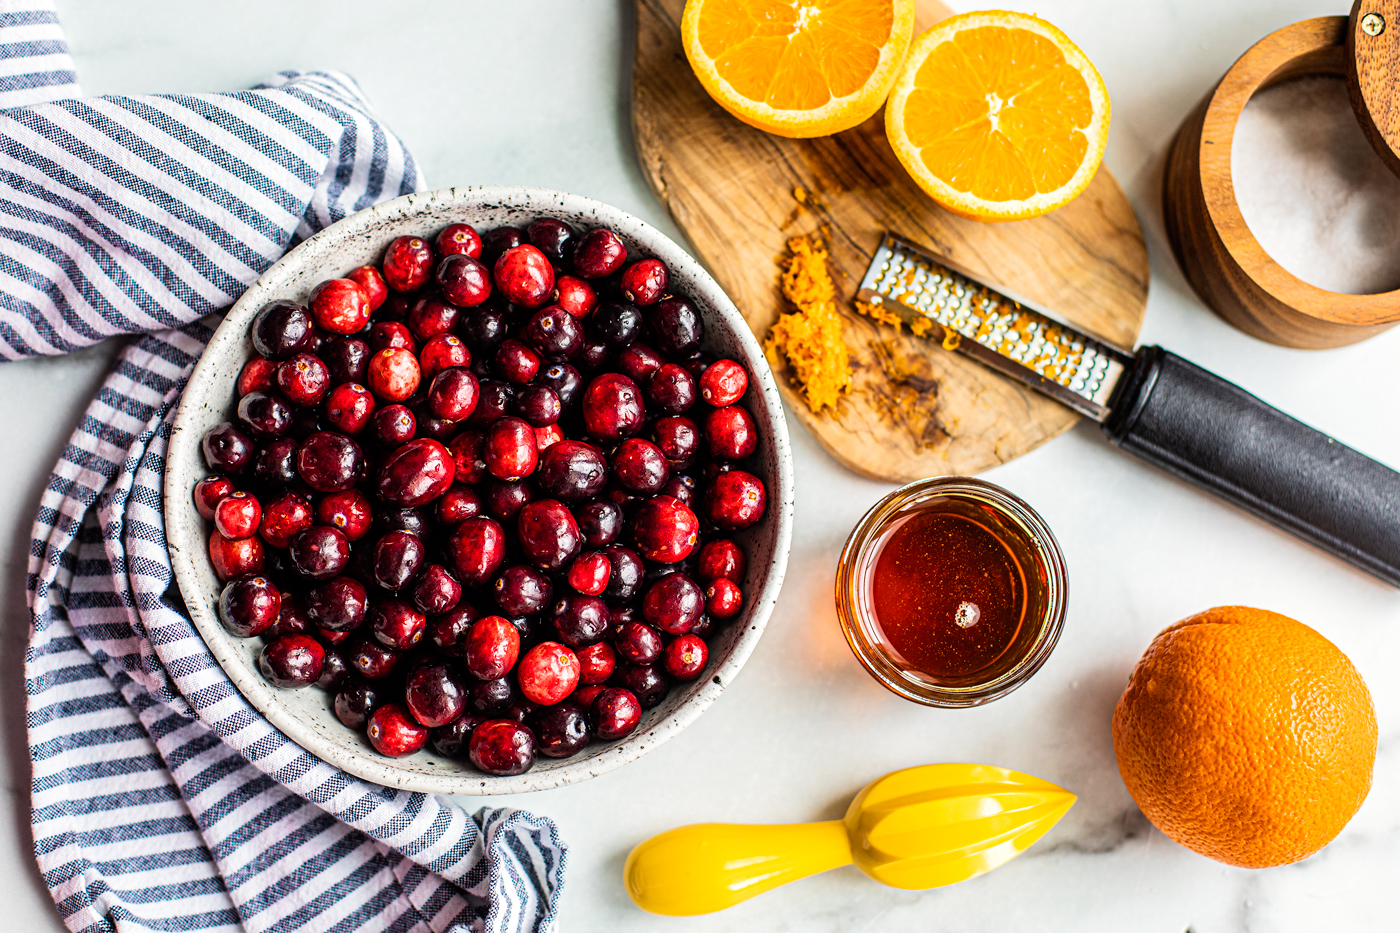 Bowl of fresh cranberries, a sliced orange with orange zest on a cutting board, a small jar or honey, and a salt crock.